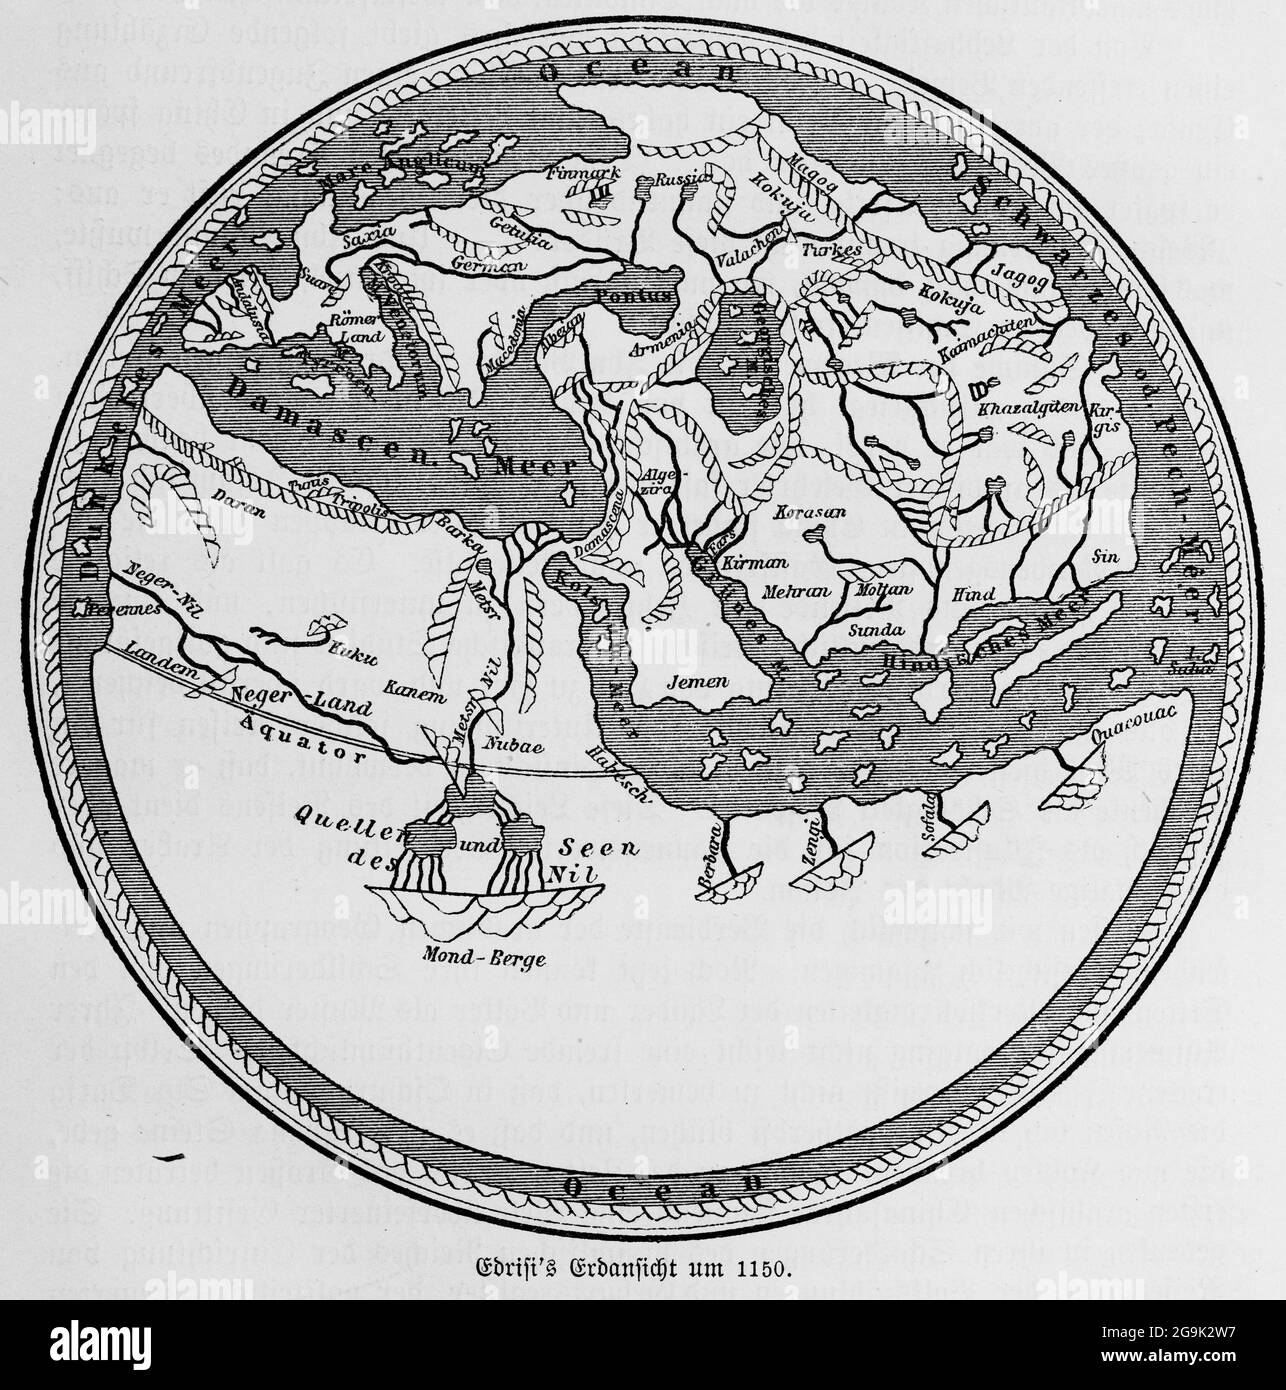 Earth View Of The Nubian Geographer Edrisi Or Al Idrisi From The 12th Century Historical World Map Illustration From 1881 2G9K2W7 